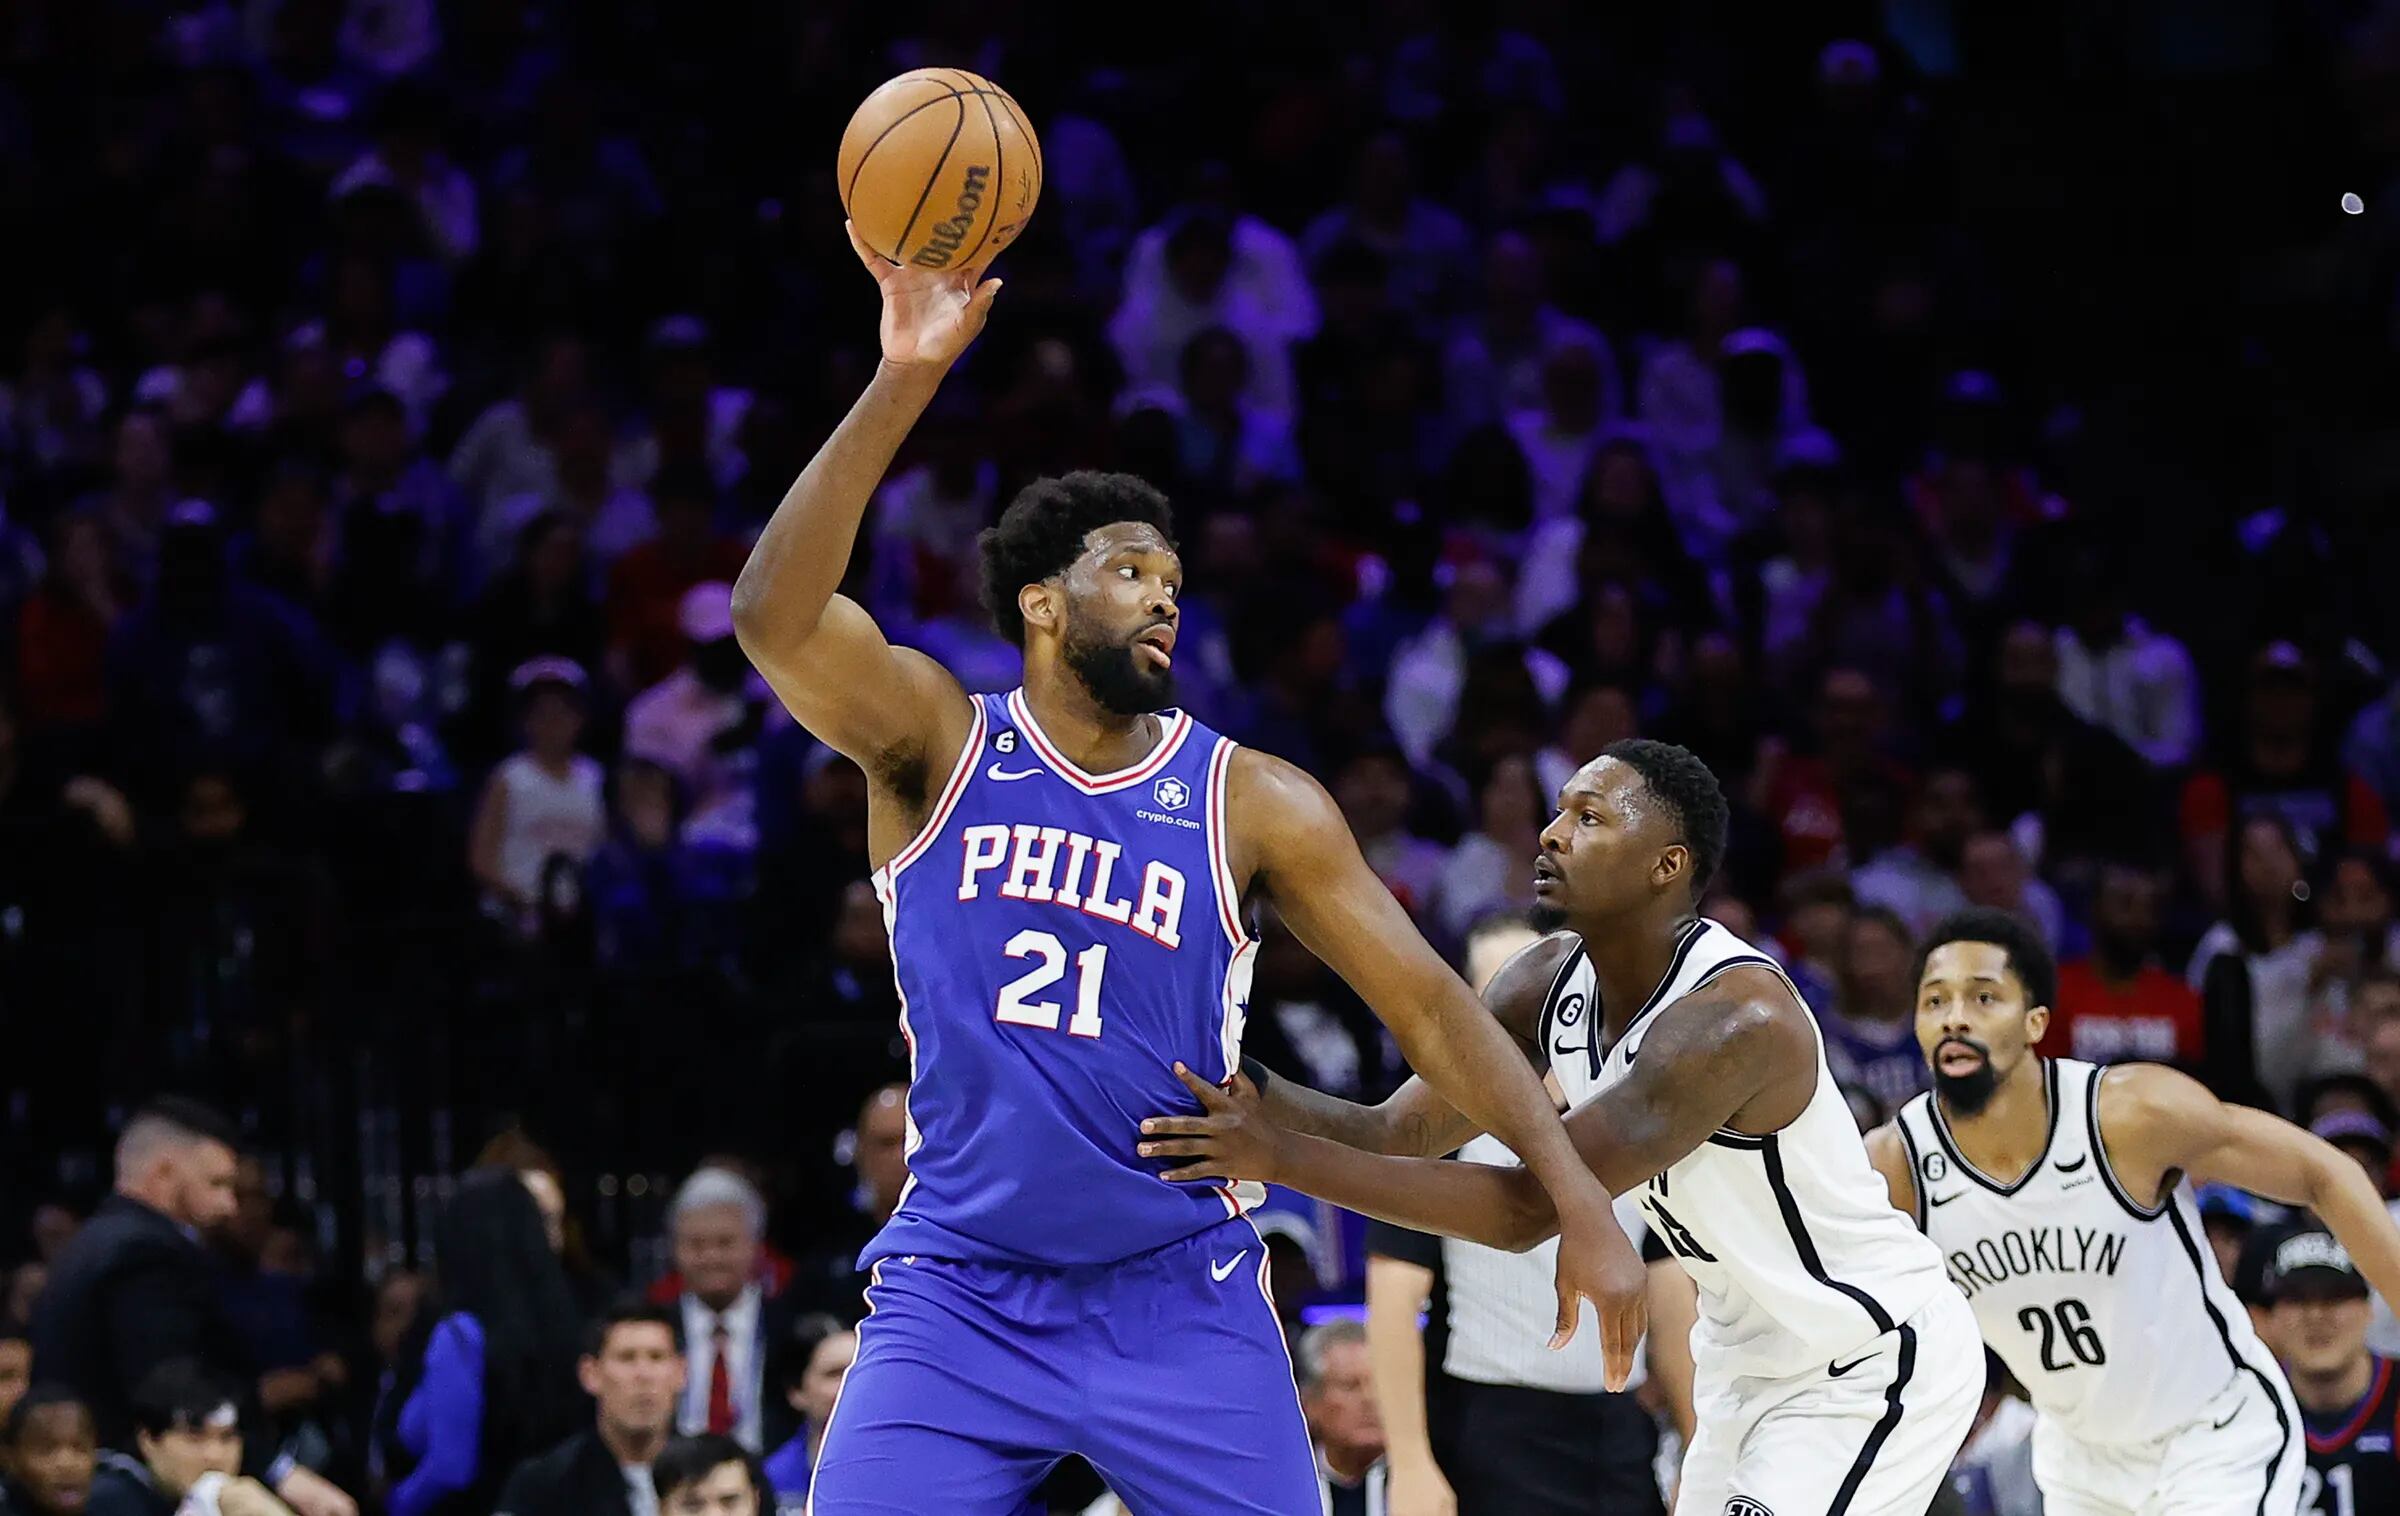 Sixers NBA playoffs: Kate Scott on Nets matchup, Embiid for MVP - WHYY